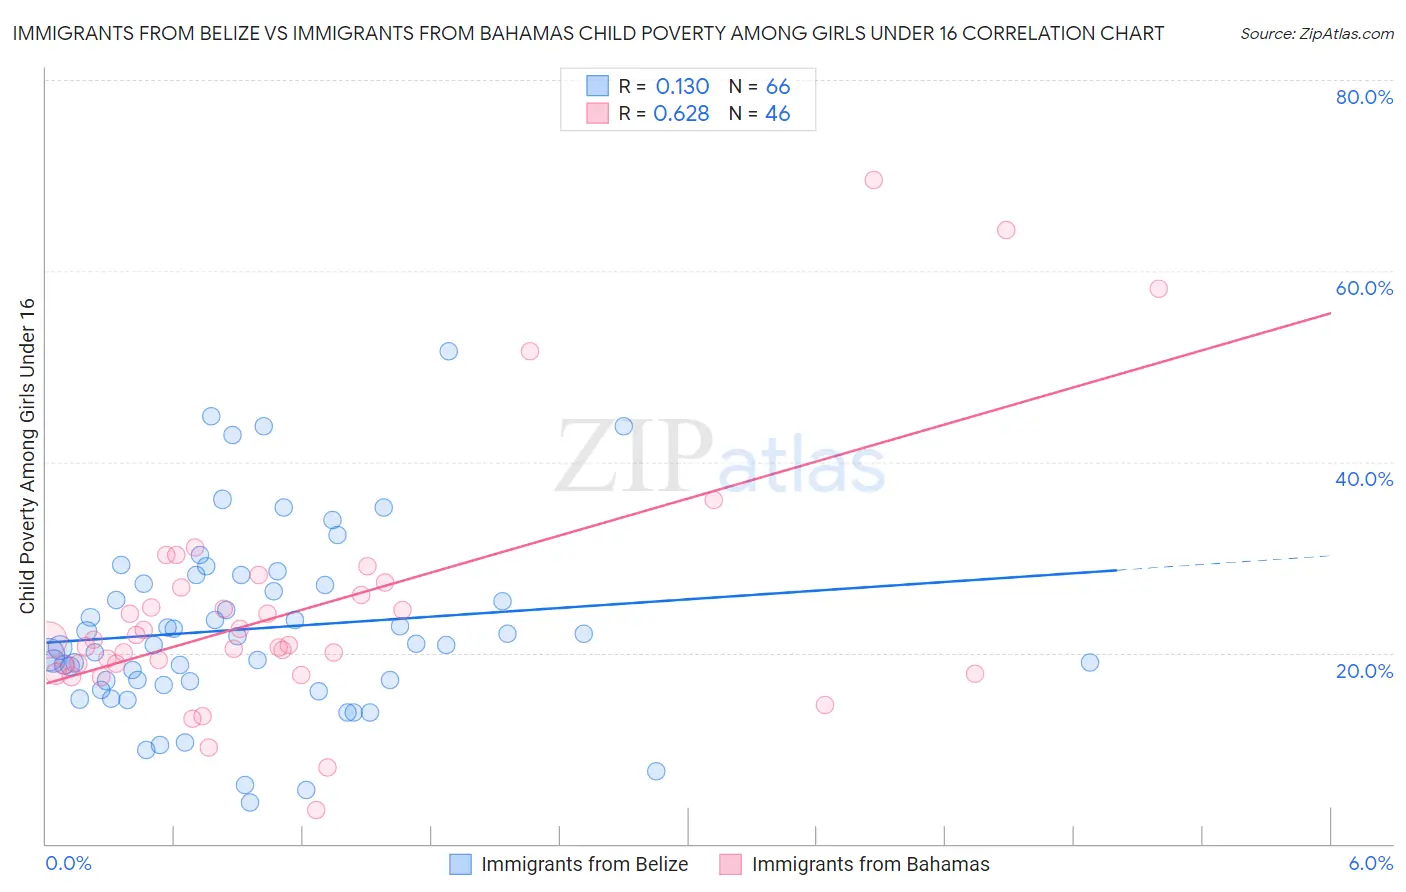 Immigrants from Belize vs Immigrants from Bahamas Child Poverty Among Girls Under 16